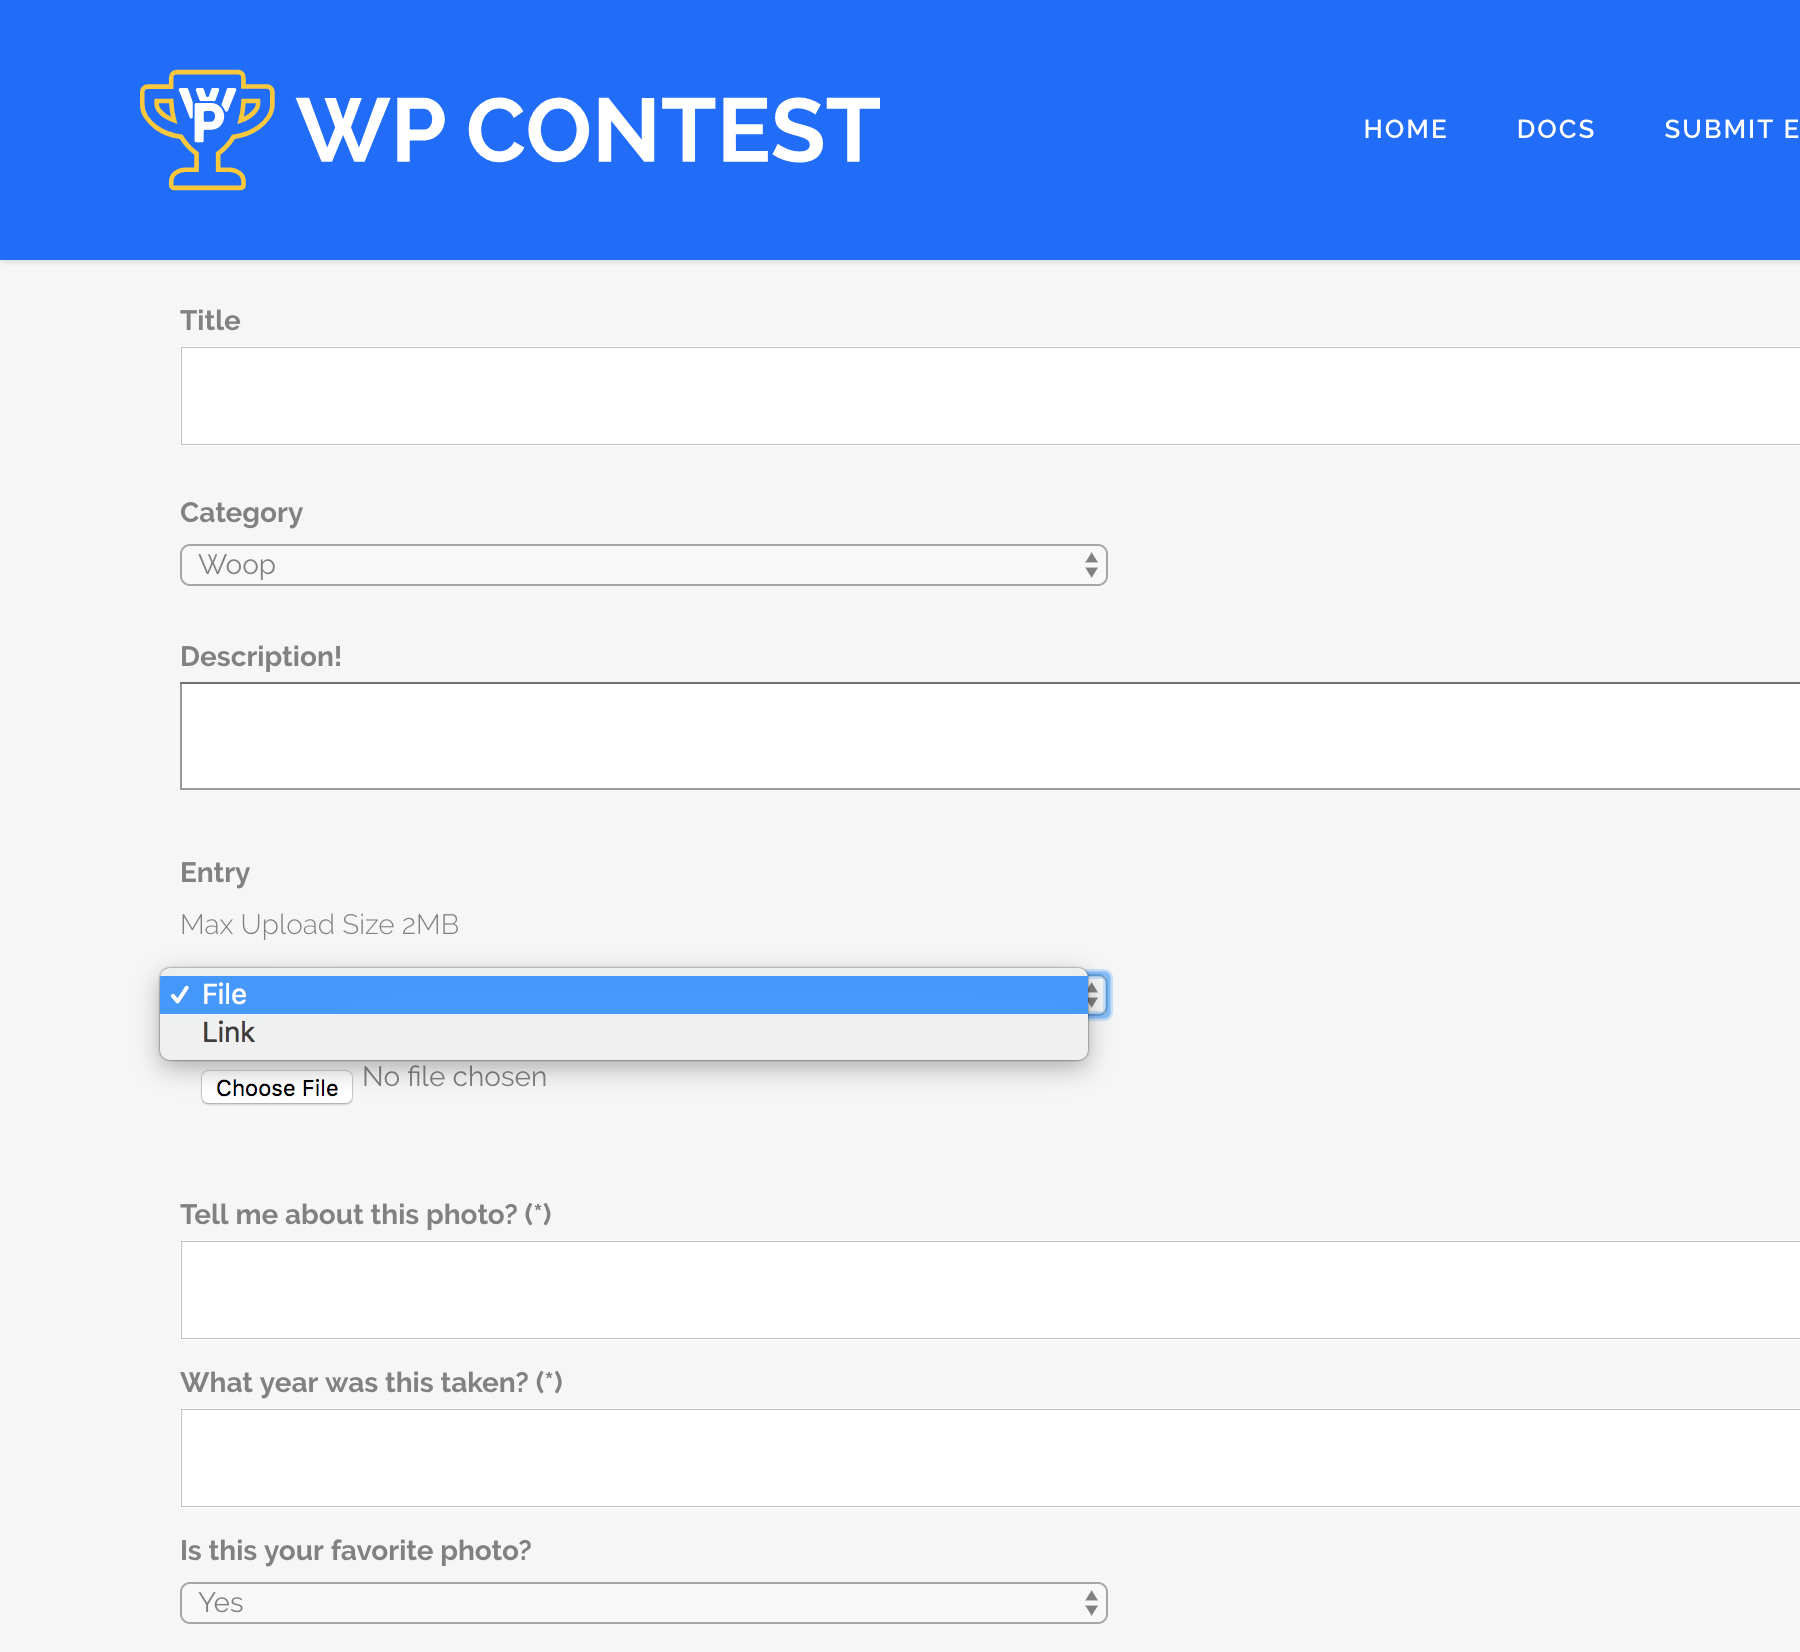 Customizable entry form; allow contestants to submit multiple entries